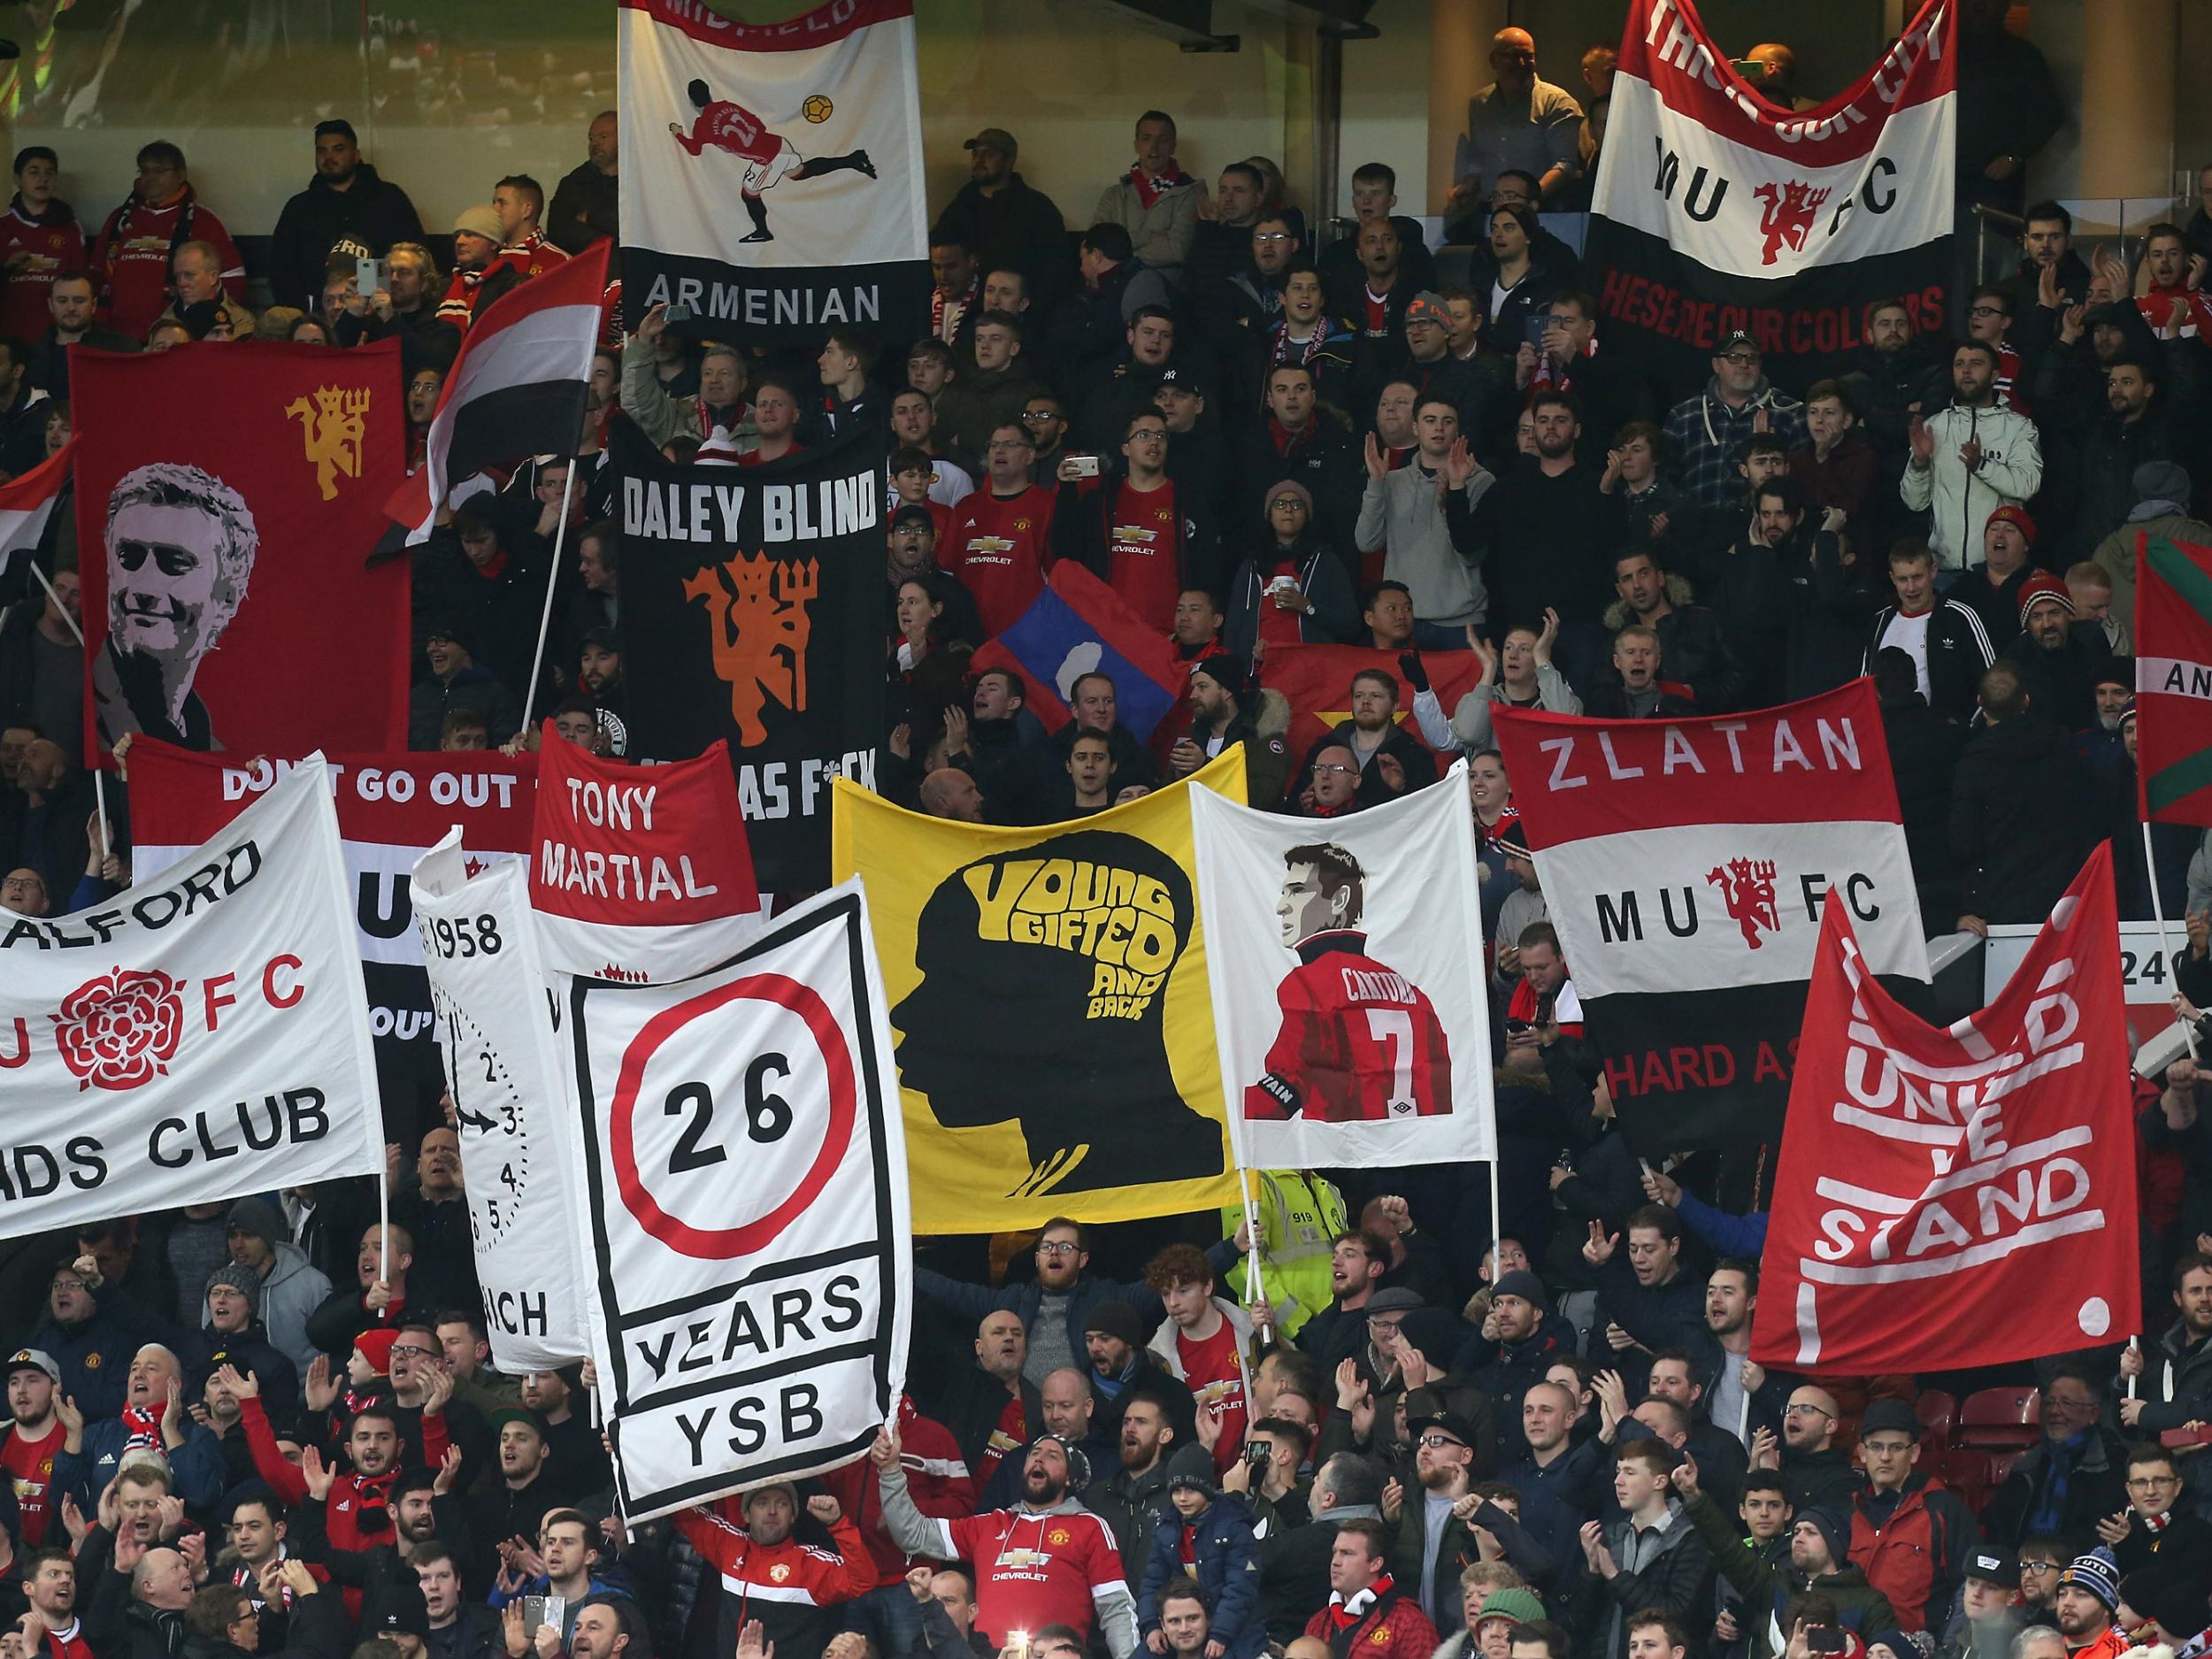 Manchester United implemented a 'singing section' at Old Trafford four years ago